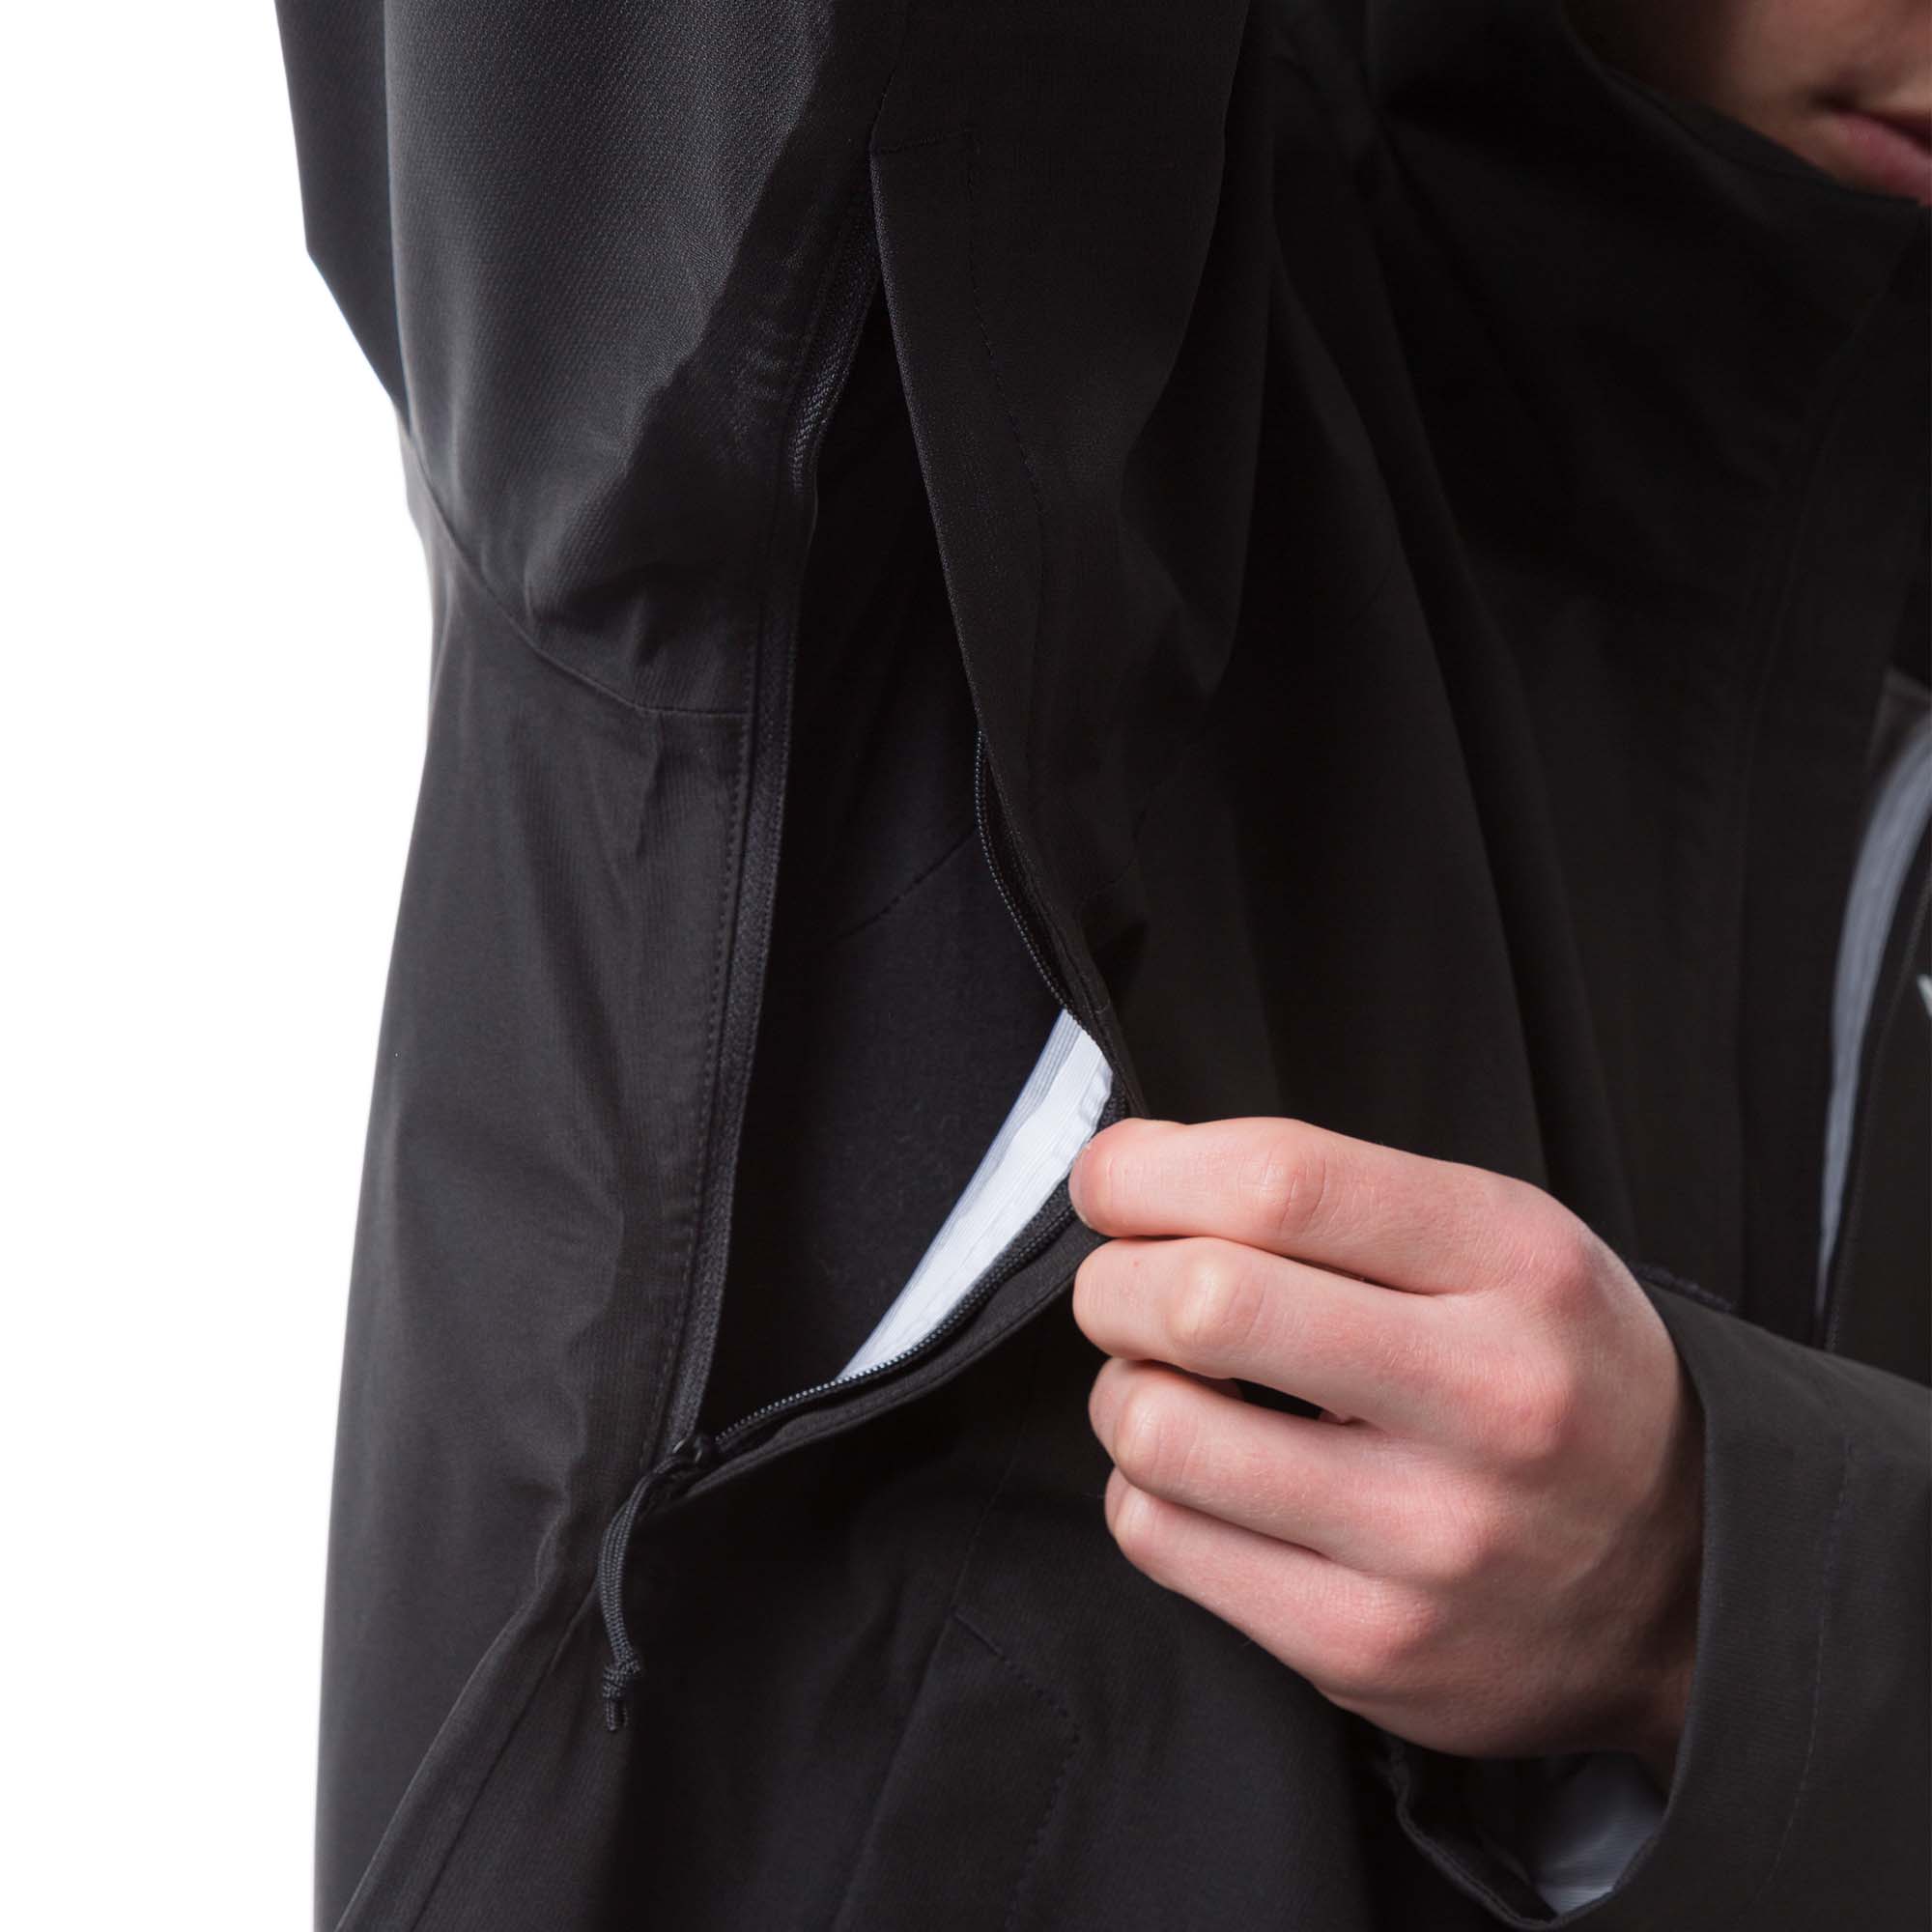 The North Face Whiton 3L Waterproof Jacket